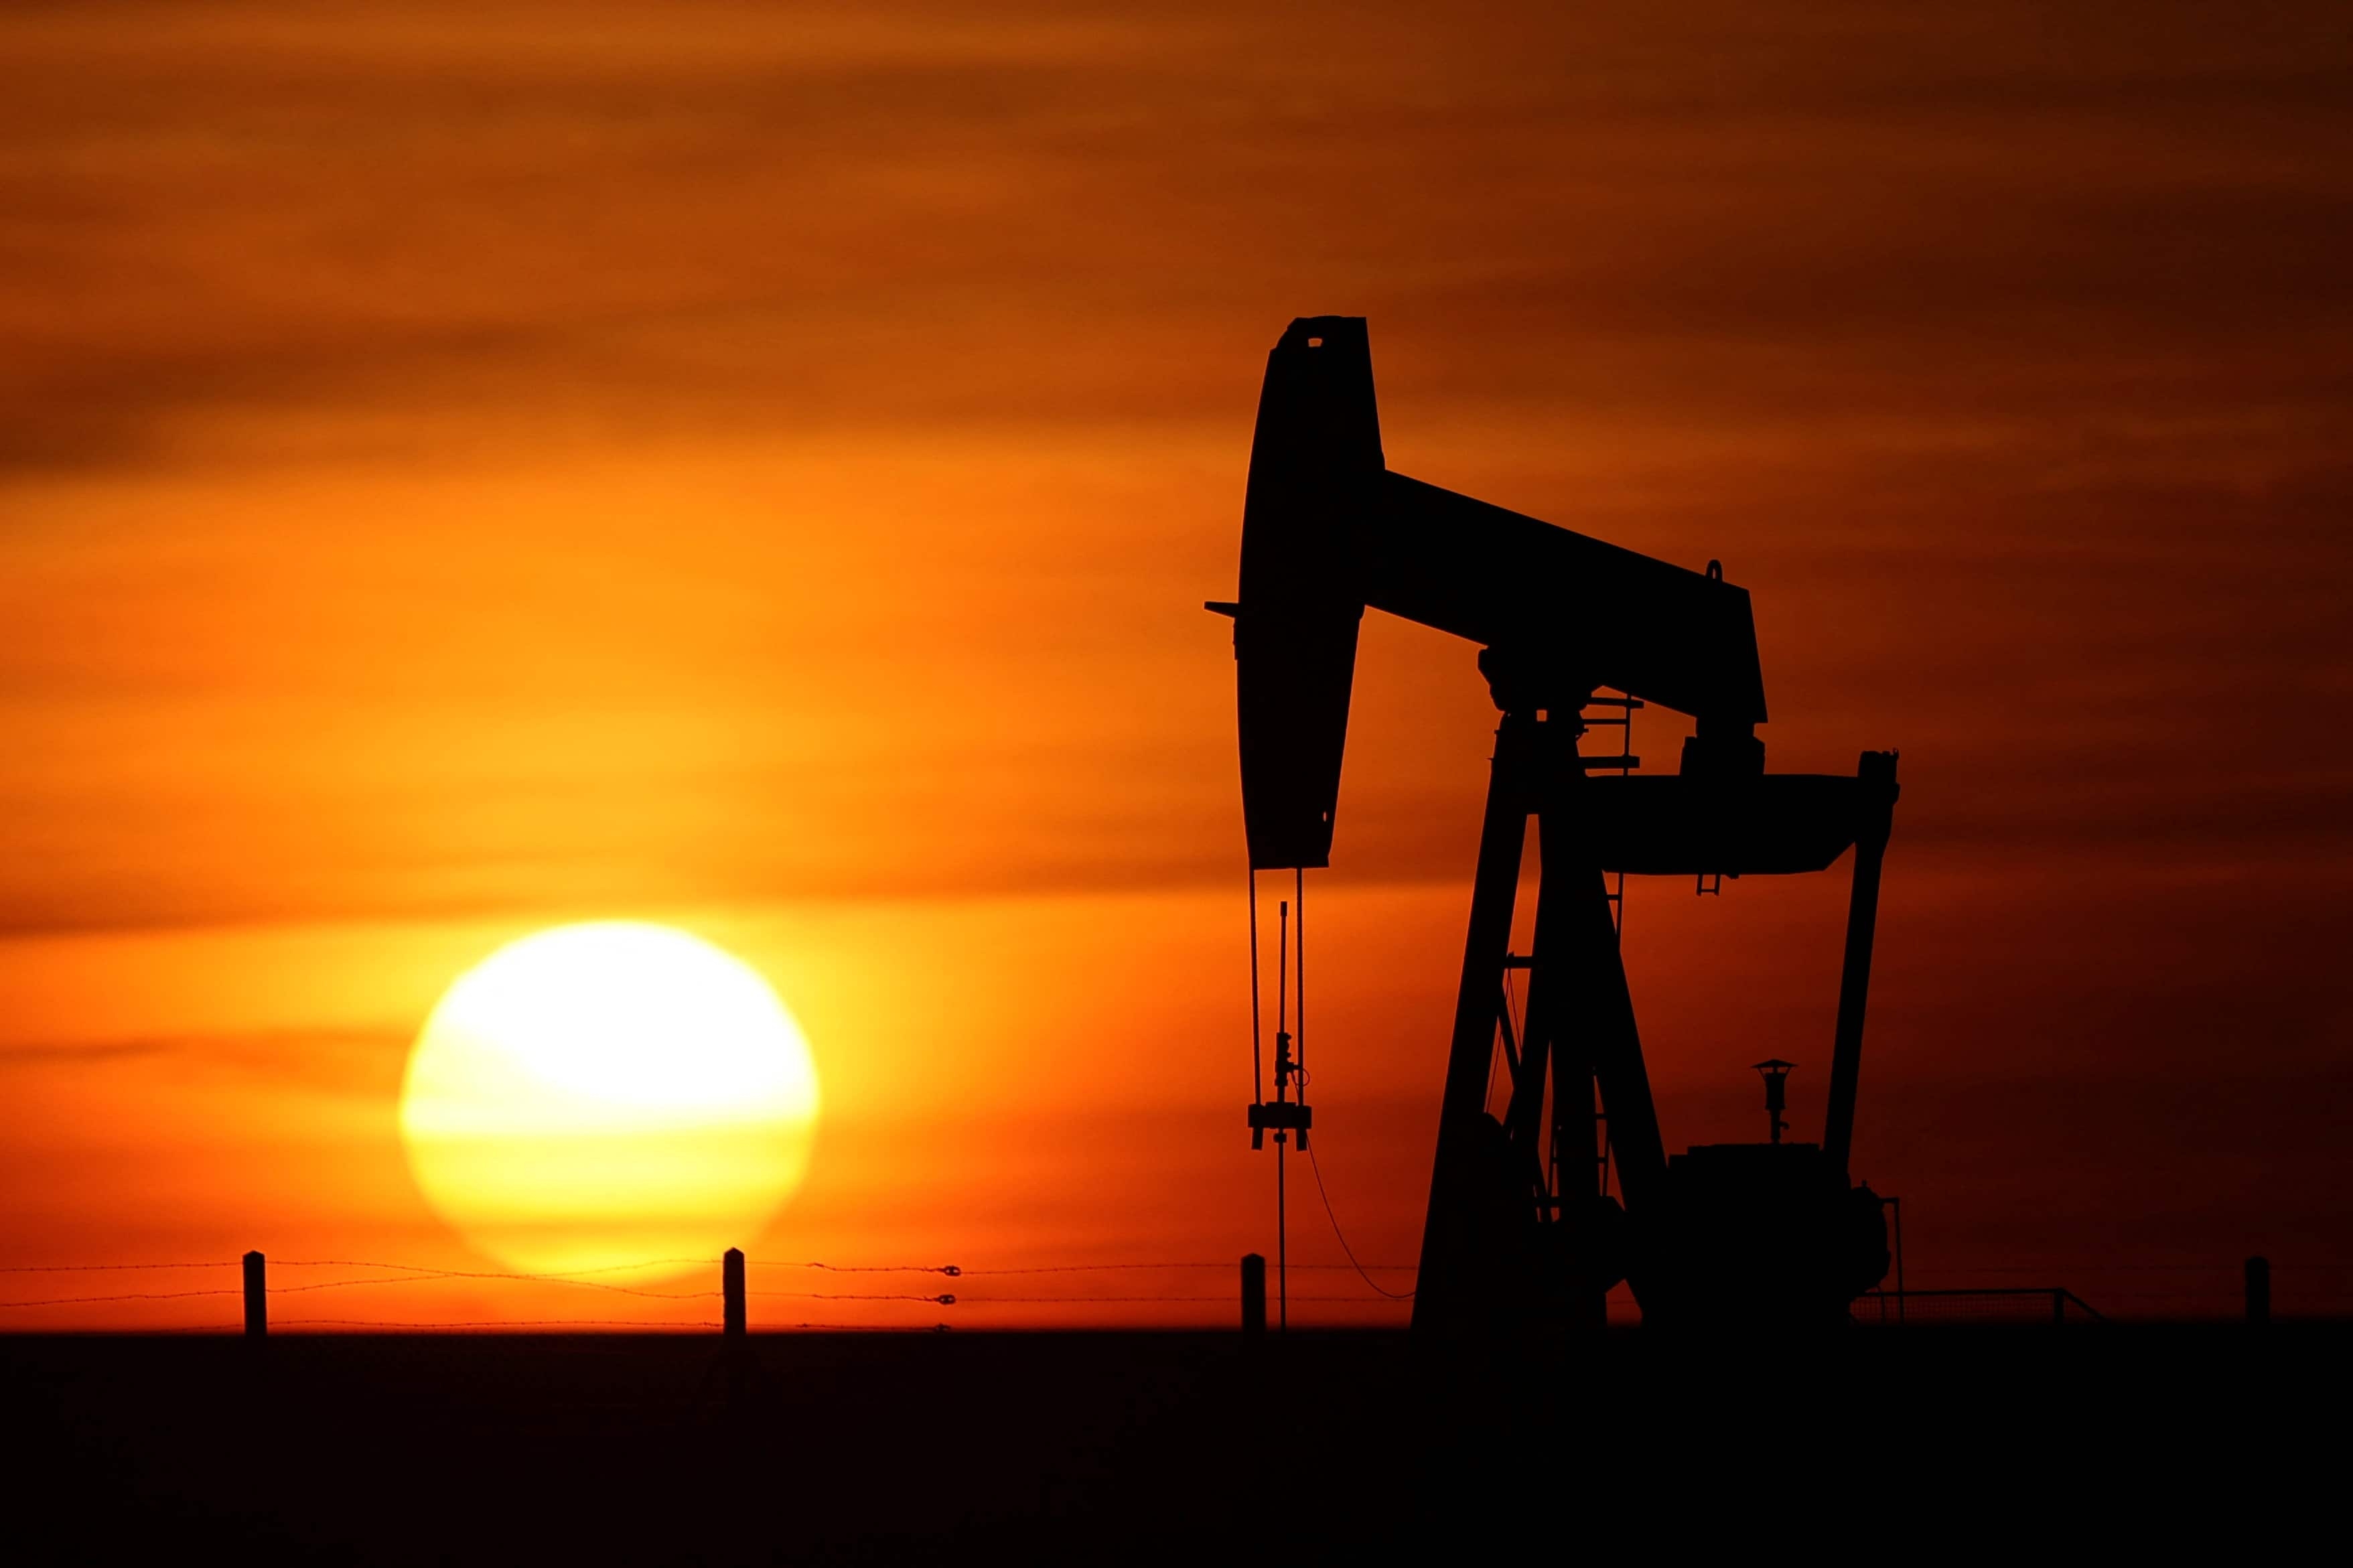 Oil prices fell on Monday in holiday-sapped trade in Asia as concerns about slowing economic growth in China, the world's top oil importer, outweighed fears of potential supply disruptions from a looming European Union ban on Russian crude. Brent crude futures fell $1.21, or 1.1%, to $105.93 a barrel at 0205 GMT, while US West Texas Intermediate (WTI) crude futures fell 99 cents, or 1%, to $103.70 a barrel. Markets in Japan, India and across Southeast Asia were closed for public holidays on Monday.